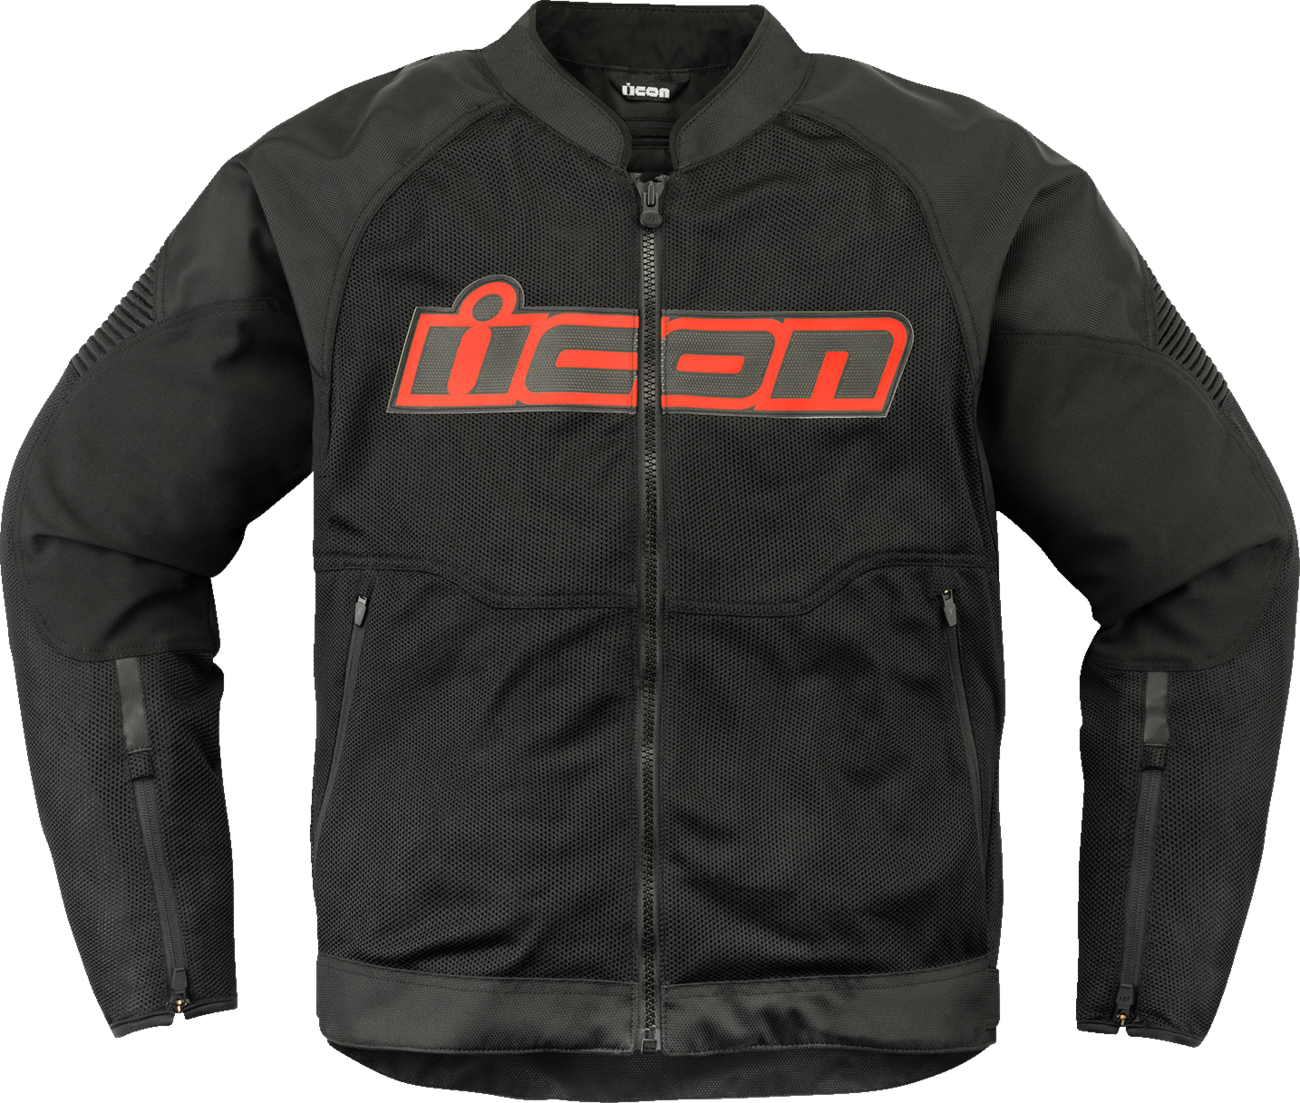 ICON Overlord3 Mesh™ CE Jacket - Slayer - 3XL 2820-6747